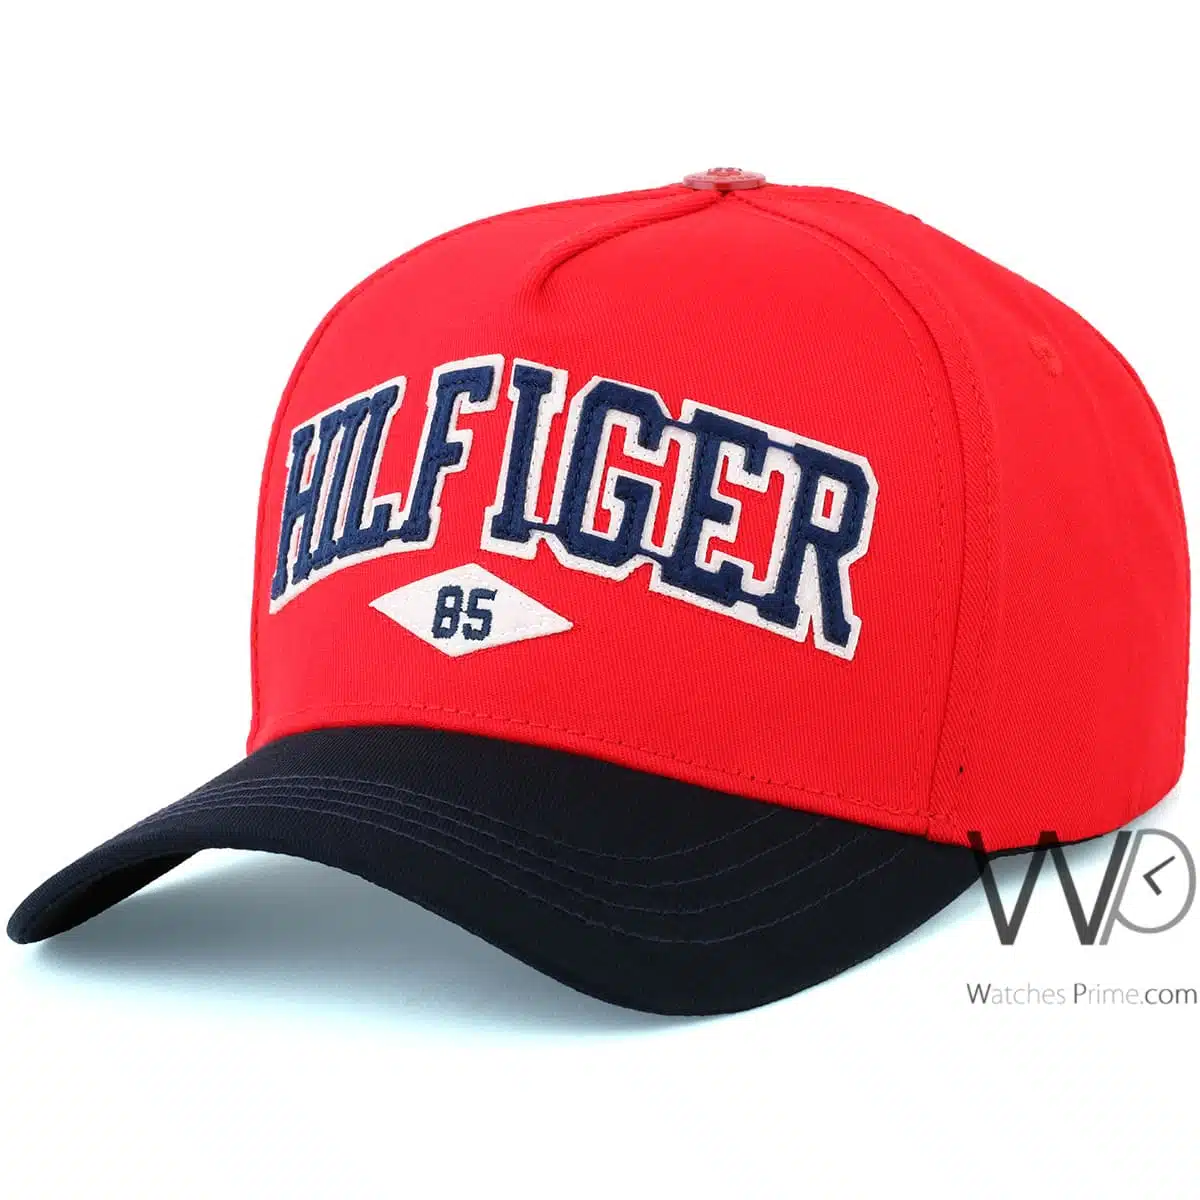 Tommy Hilfiger baseball red navy blue cap men | Watches Prime